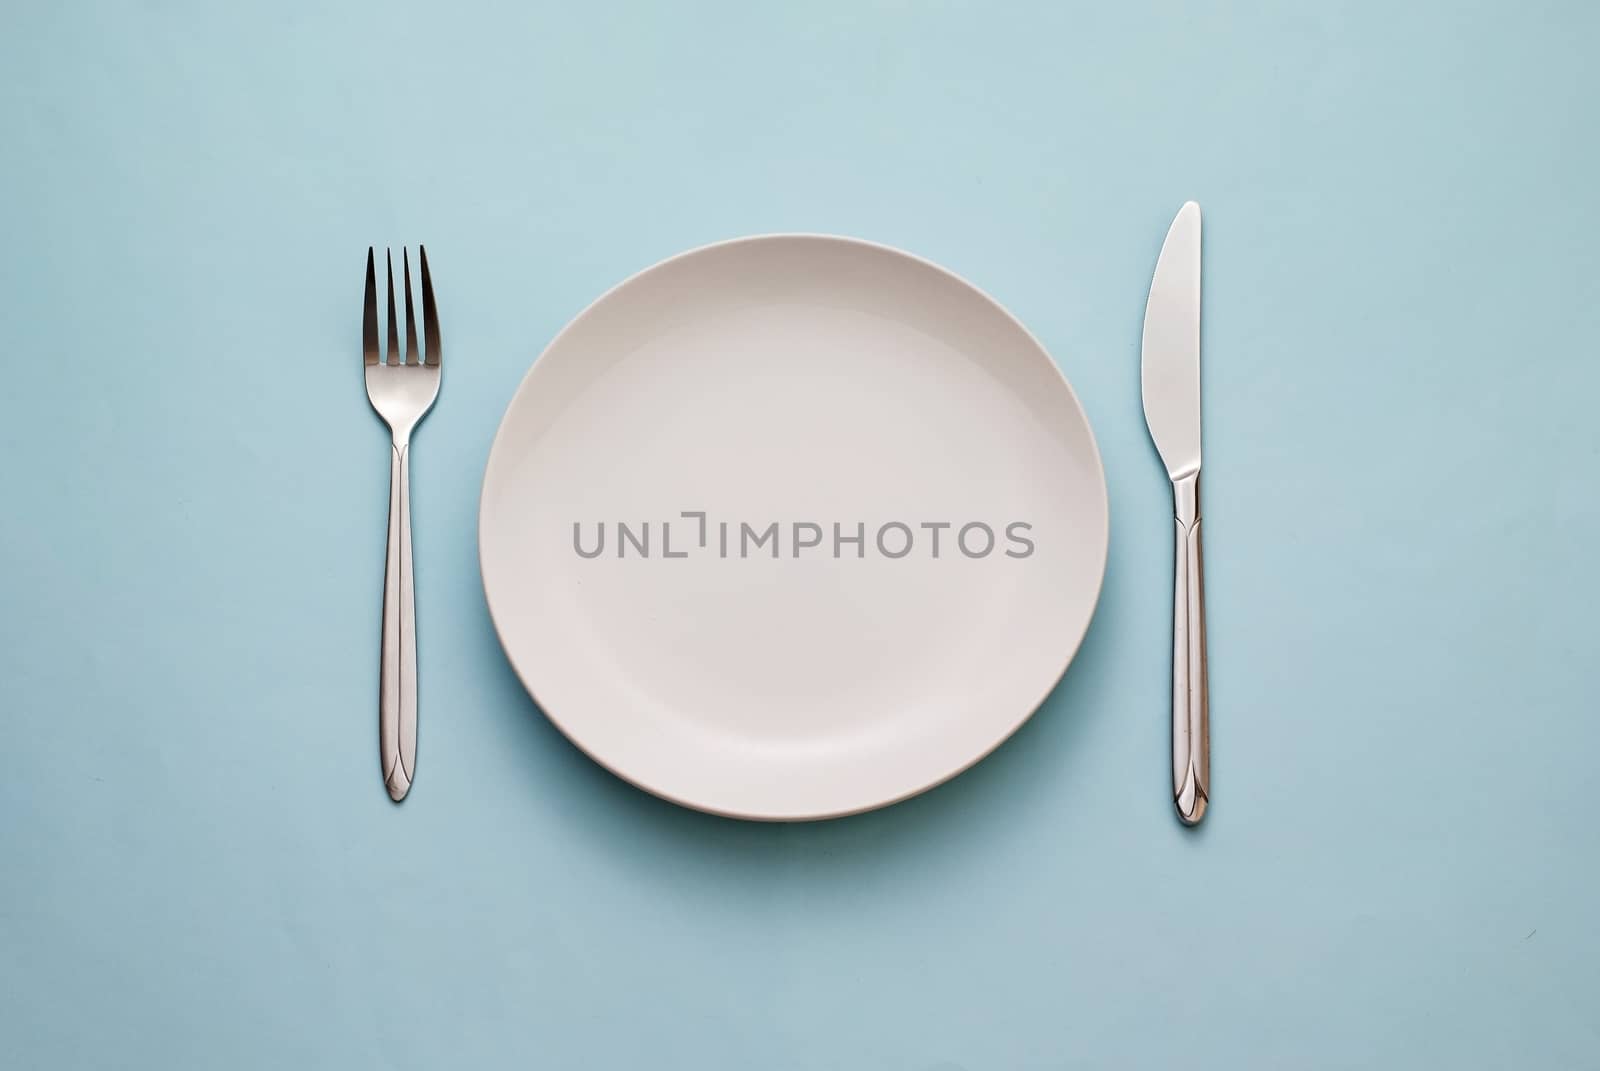 Clean empty white plate with knife and fork on a blue background conceptual of eating, food and catering